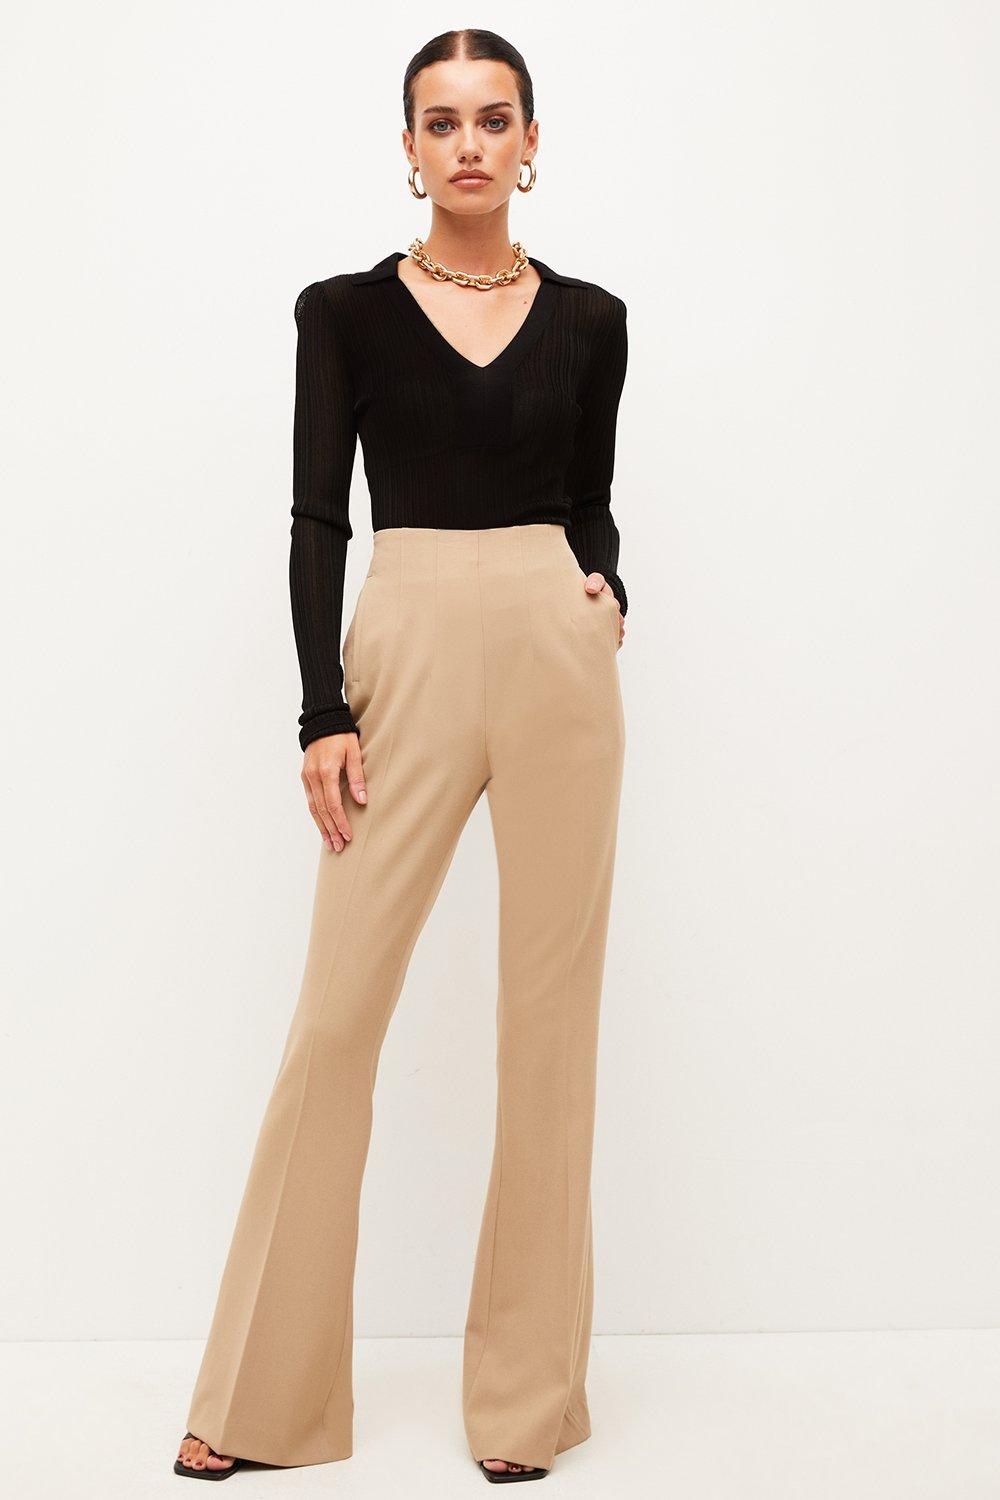 Tan trousers pants - petite workwear ideas | Work outfits women, Office  outfits women, Fashionable work outfit